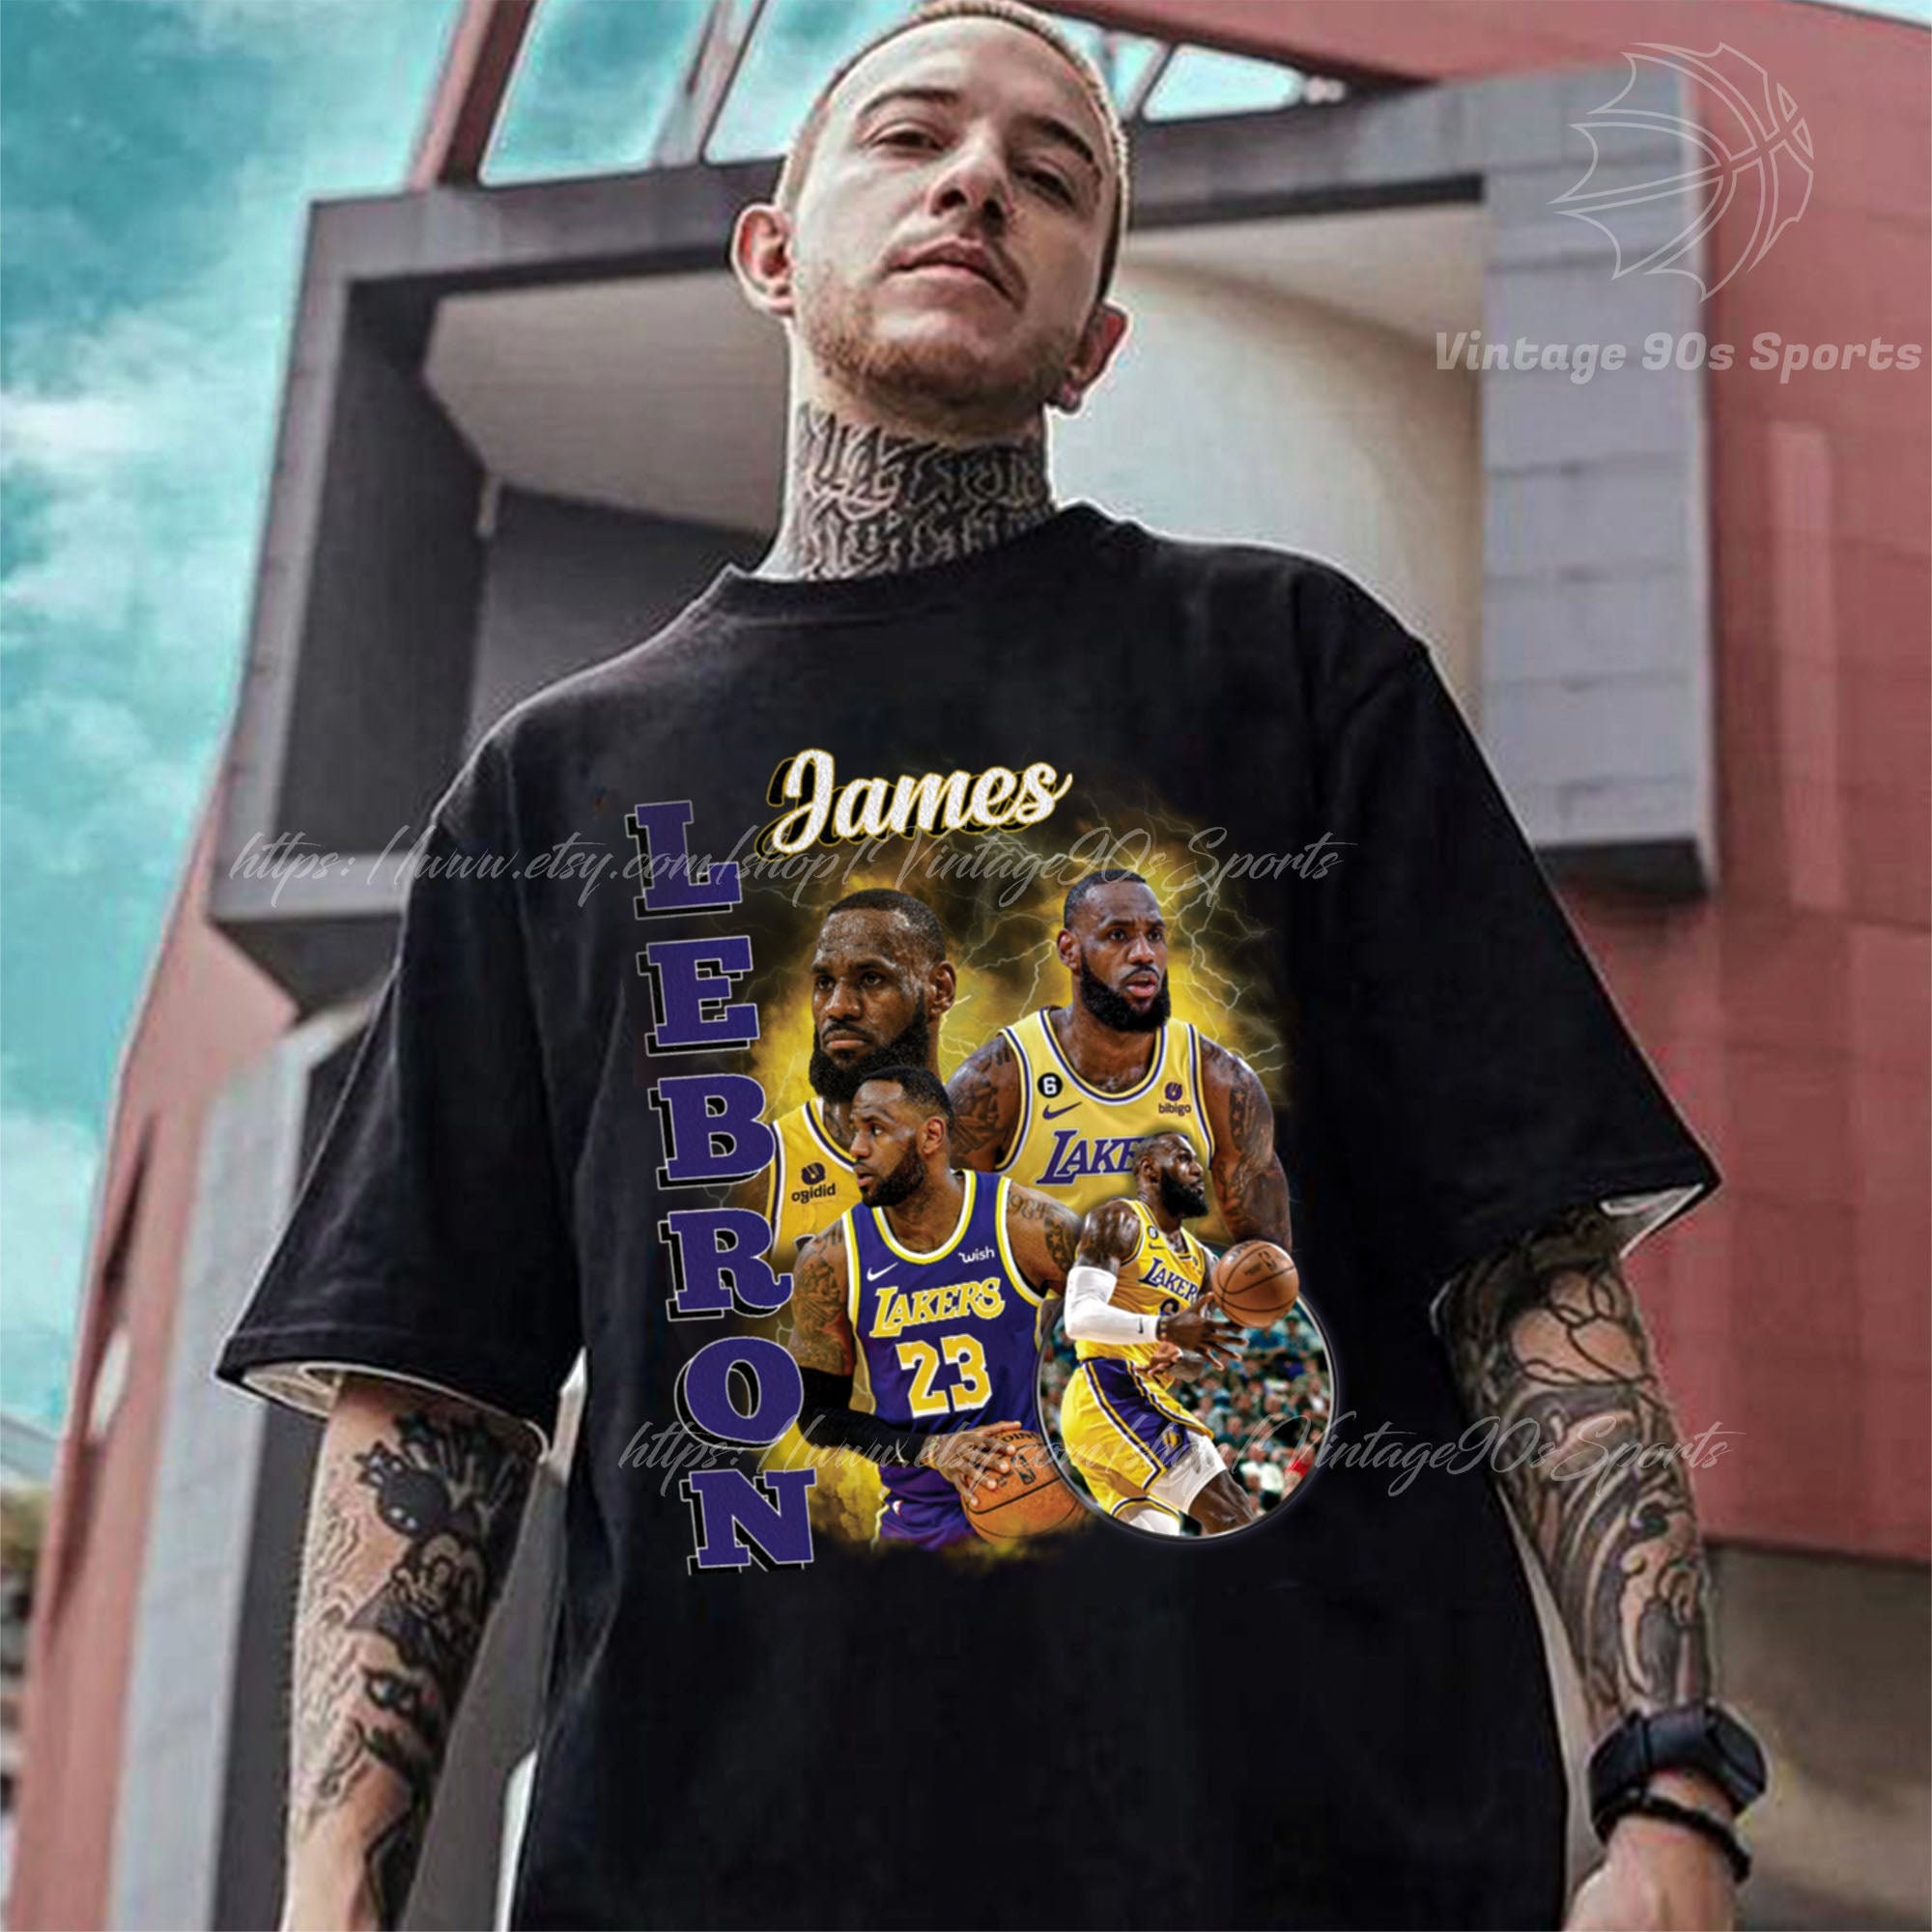 LeBron James Los Angeles Lakers Homage Number Tri-Blend T-Shirt - Gray